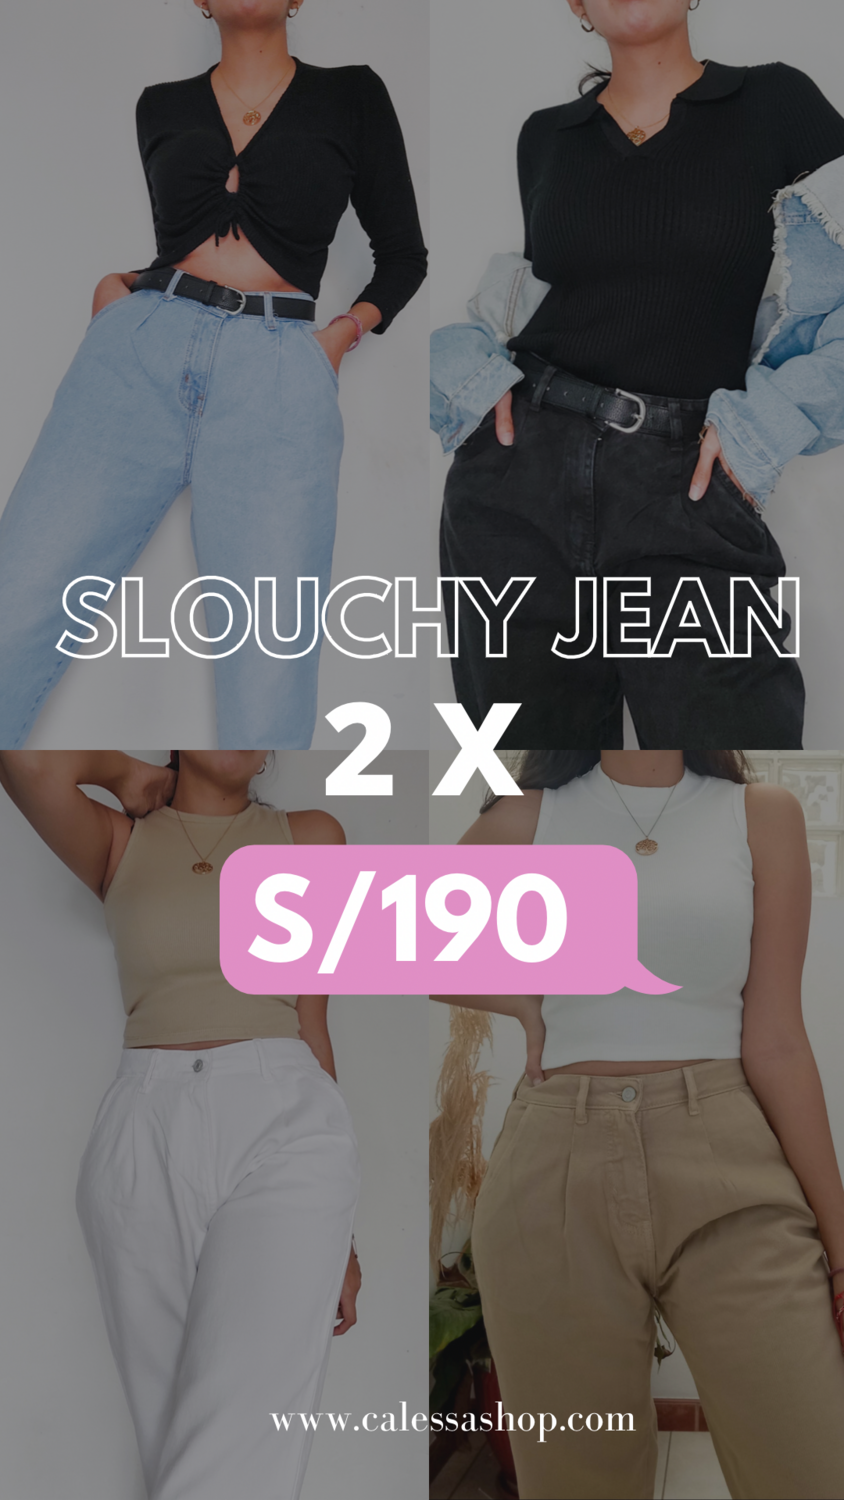 Pack 8: Slouchy Jean x 2